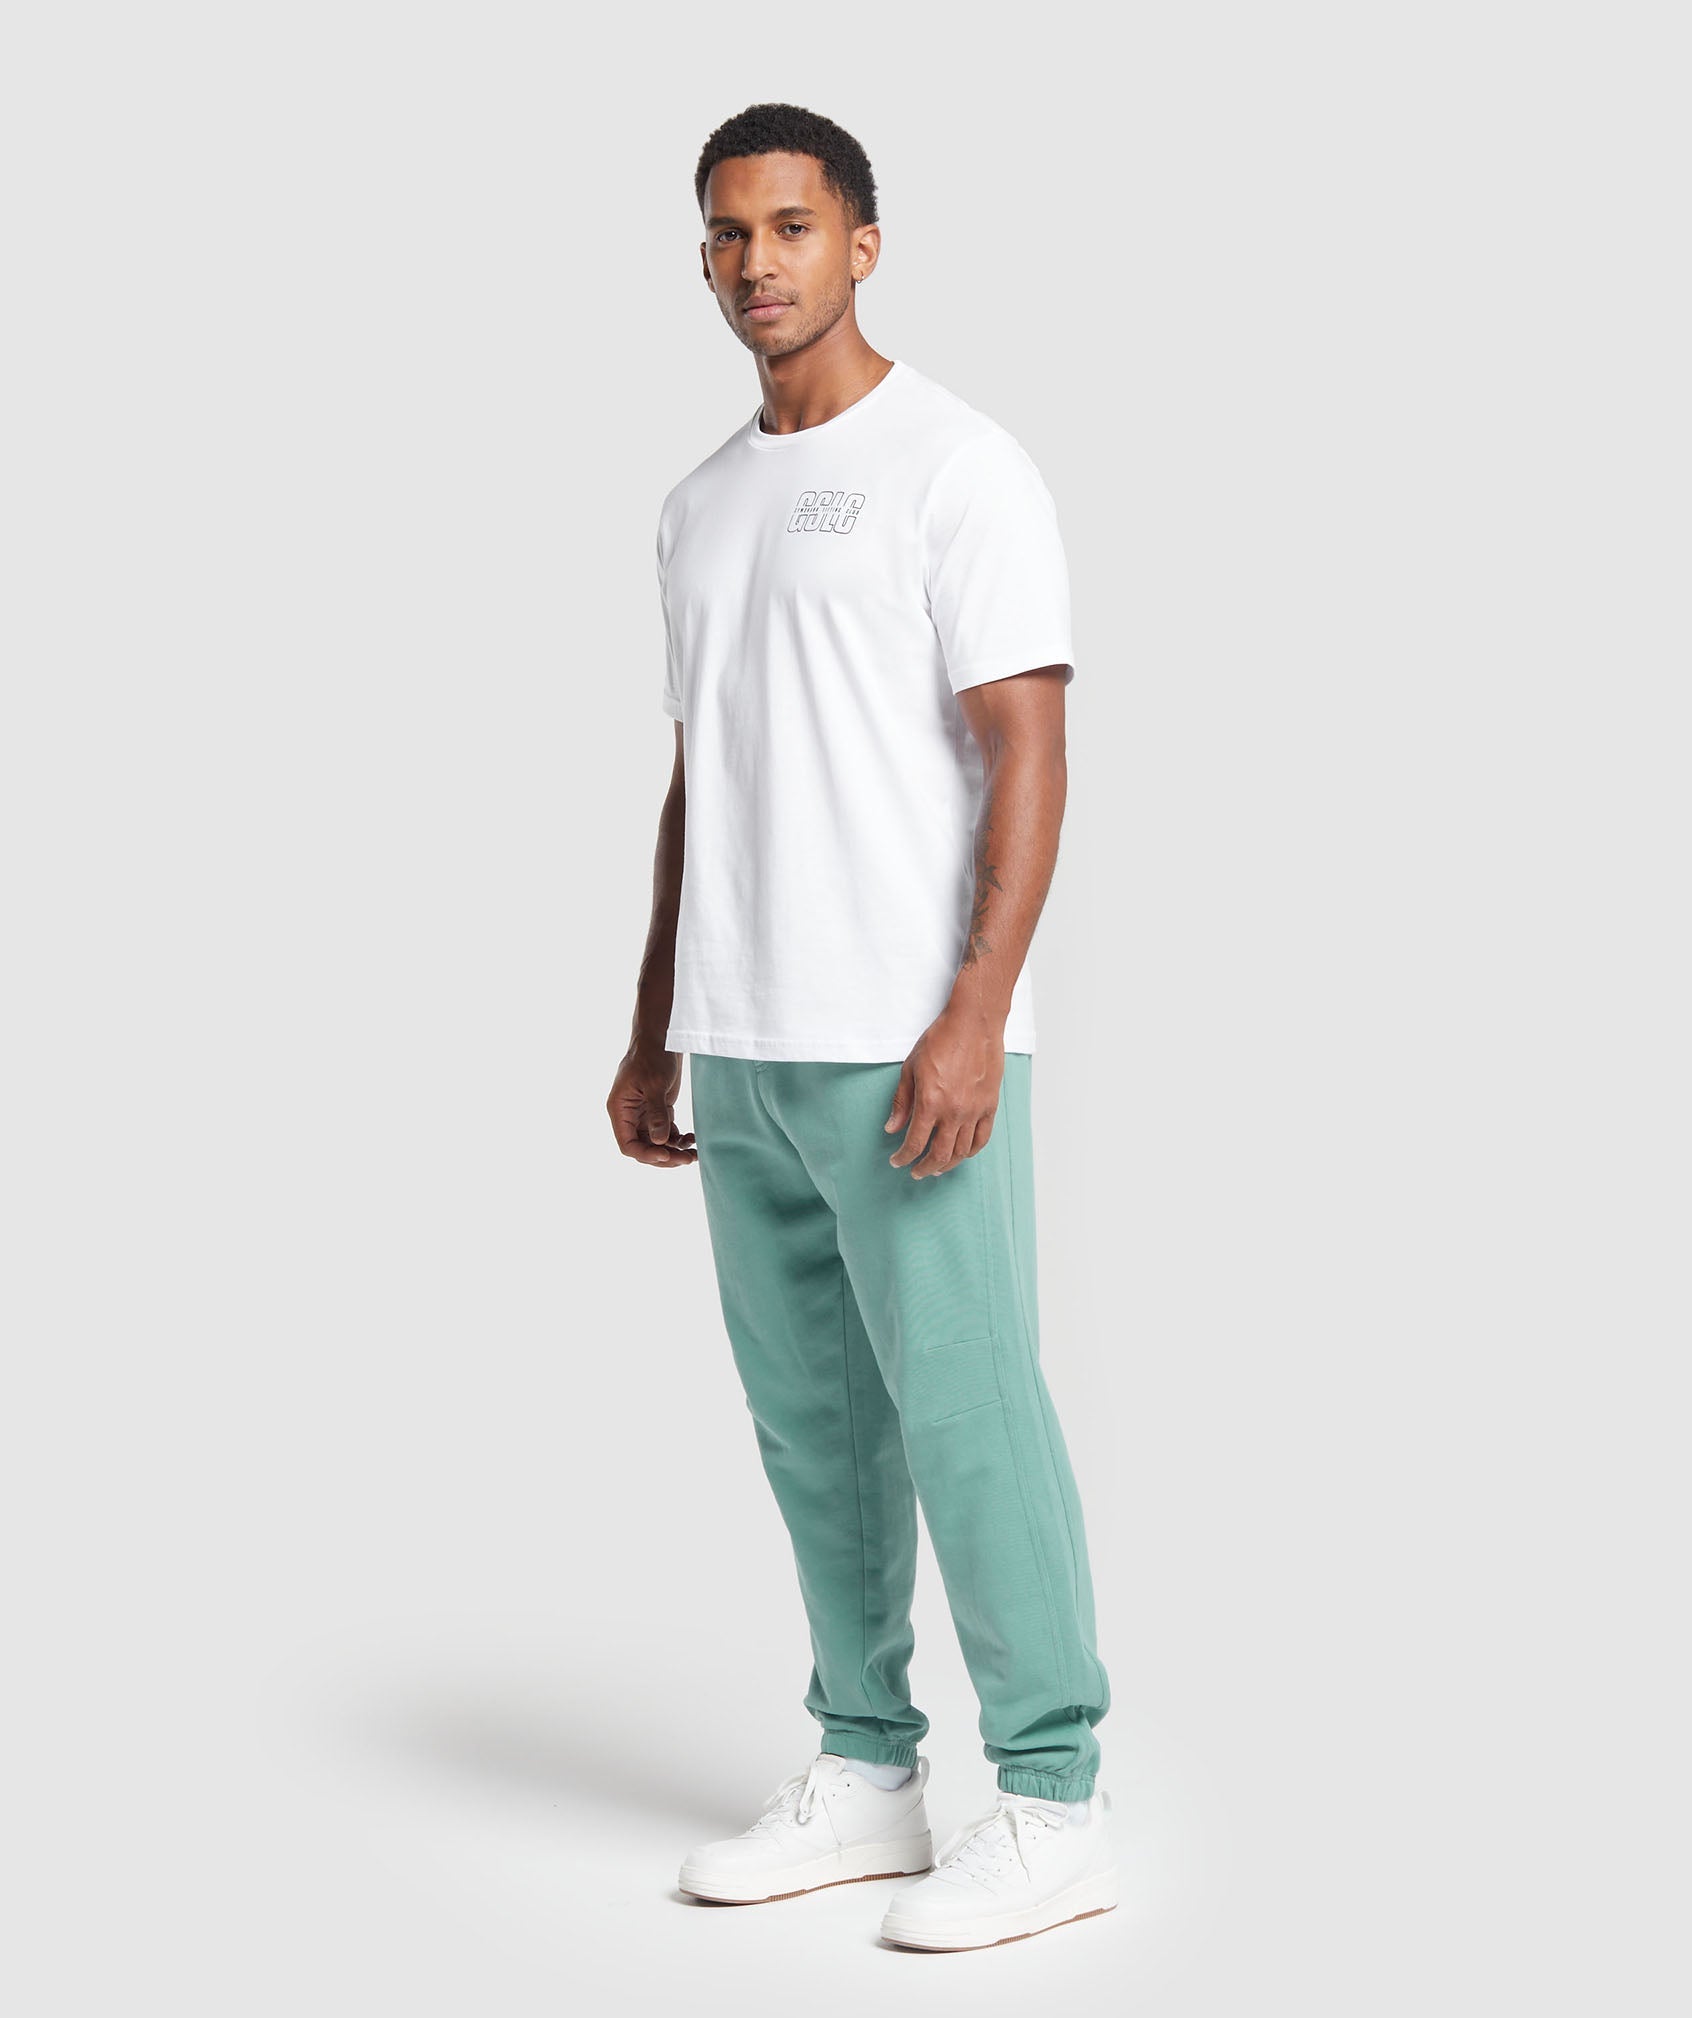 Rest Day Essentials Joggers in Duck Egg Blue - view 3